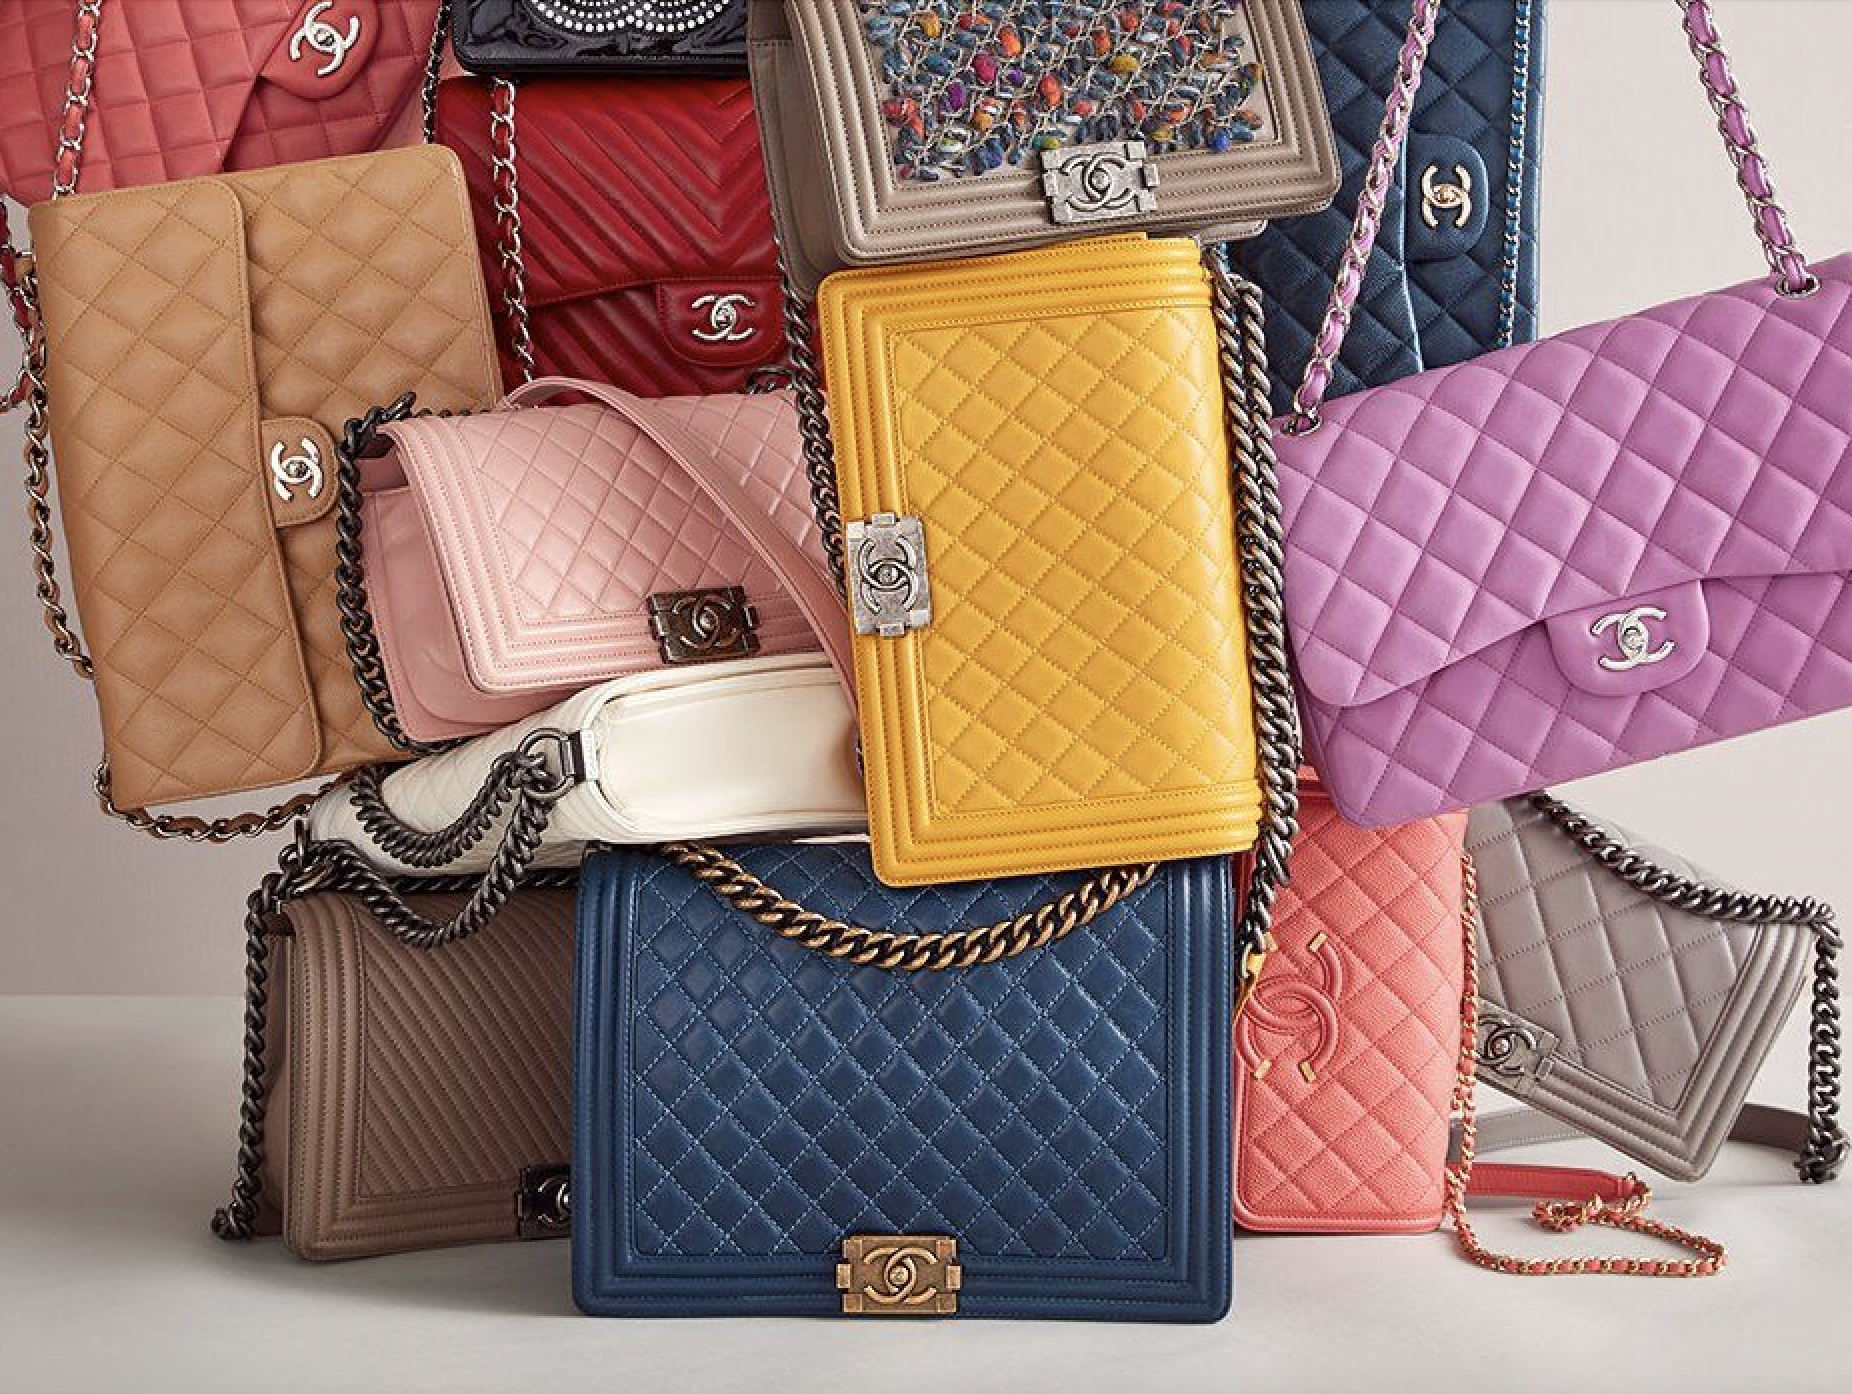 LVMH Moet Hennessy Louis Vuitton Set to Relinquish 23 Percent Stake in  Hermès - The Fashion Law